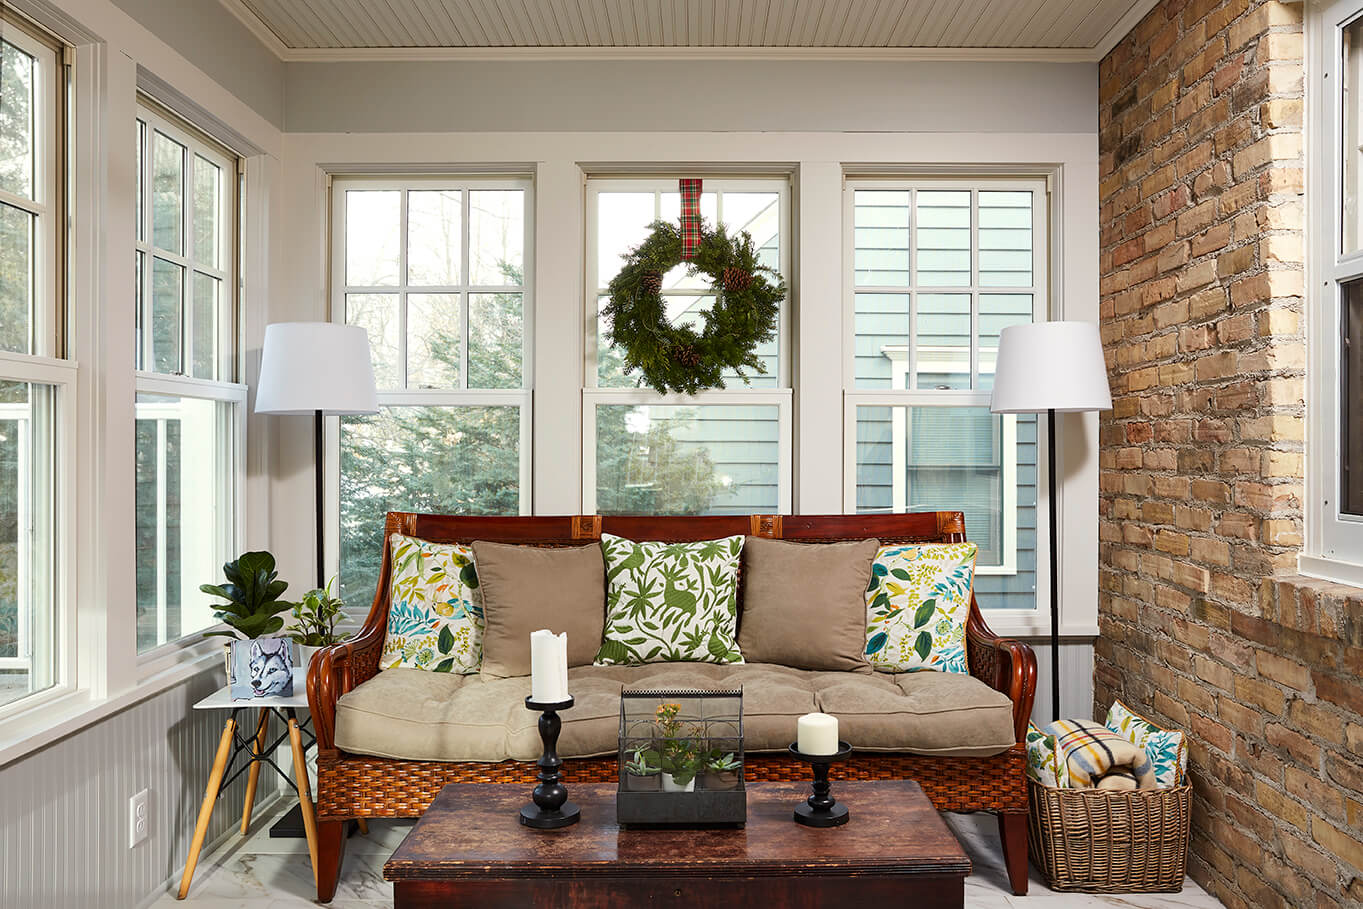 Bluestem Featured in “Expert’s Advice to a Cozy & Positive Vibe Decor” Article!